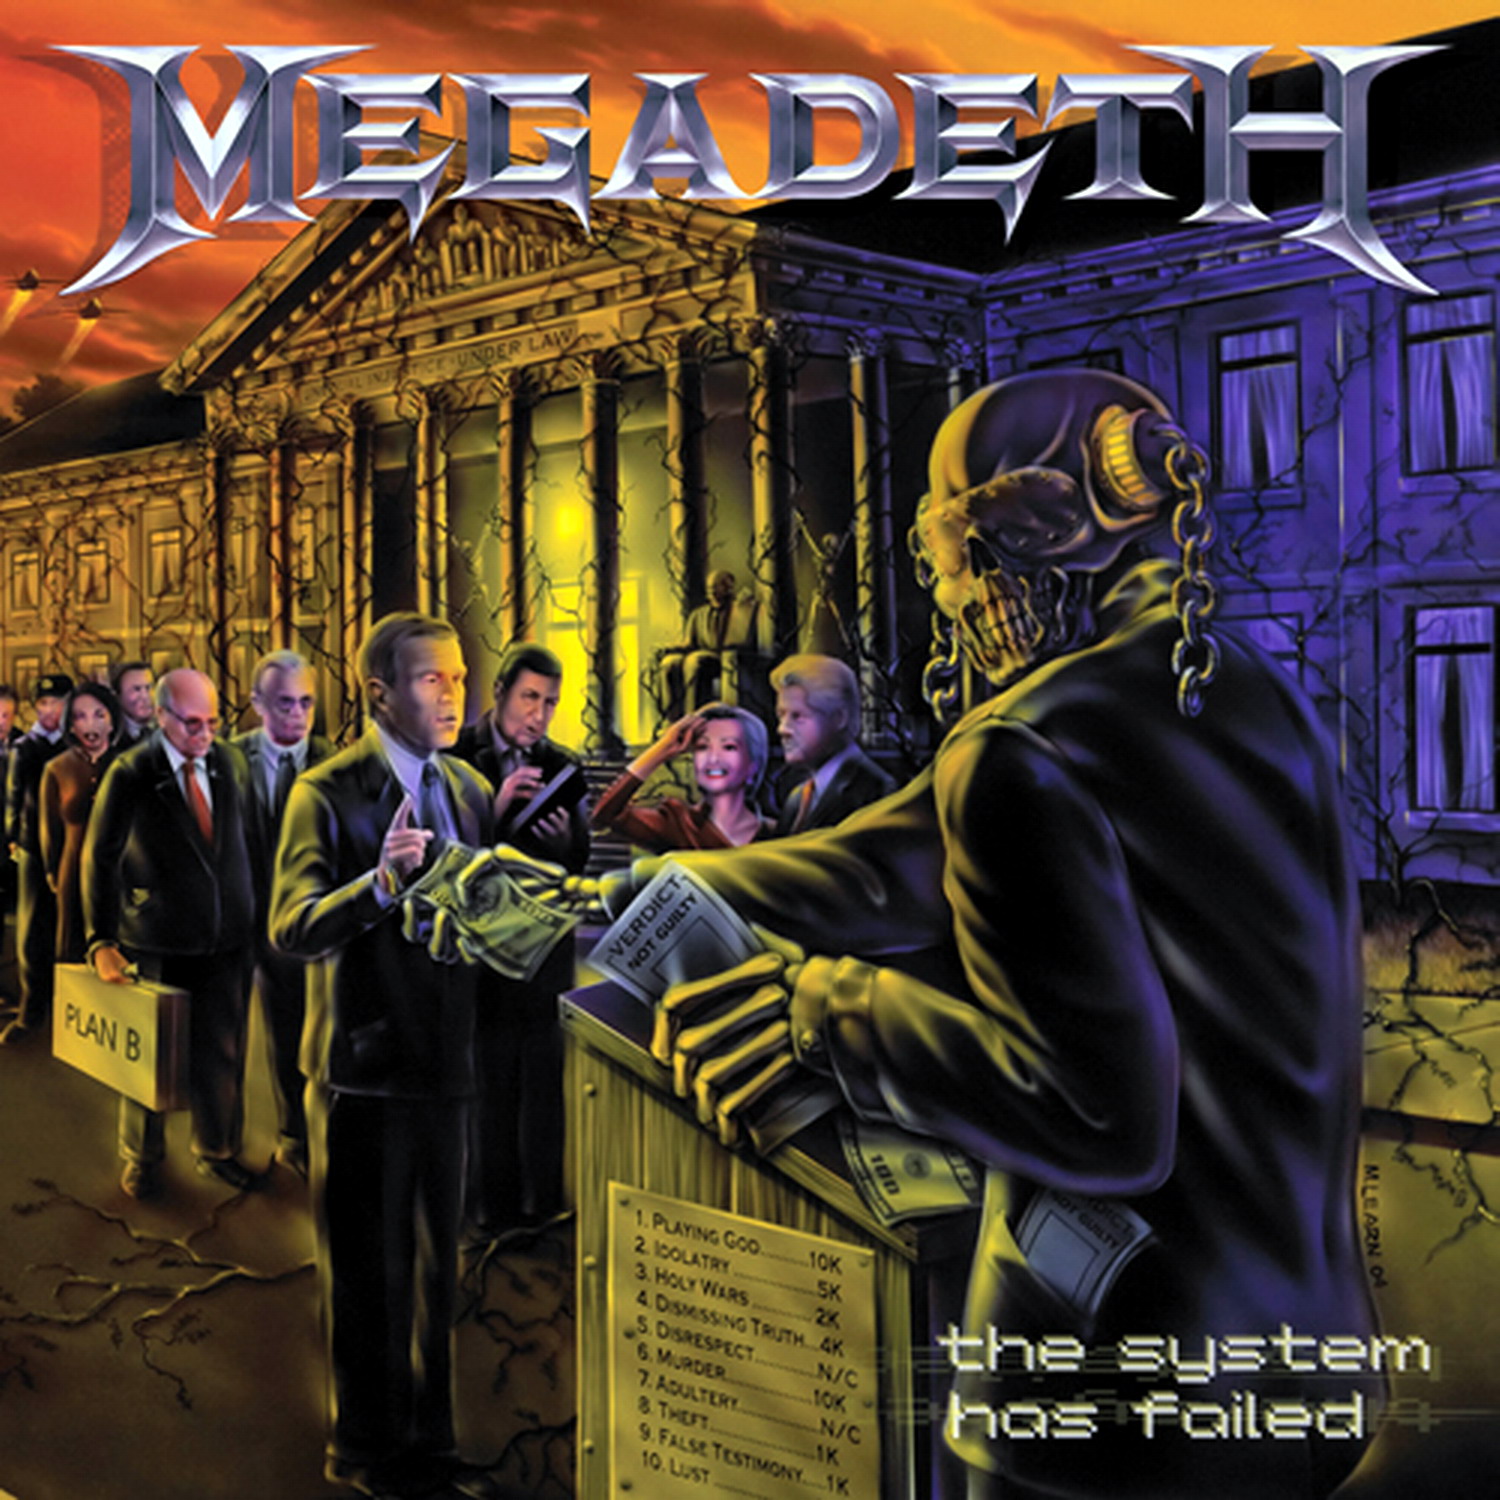 Megadeth – “Back In The Day”  Video Clip